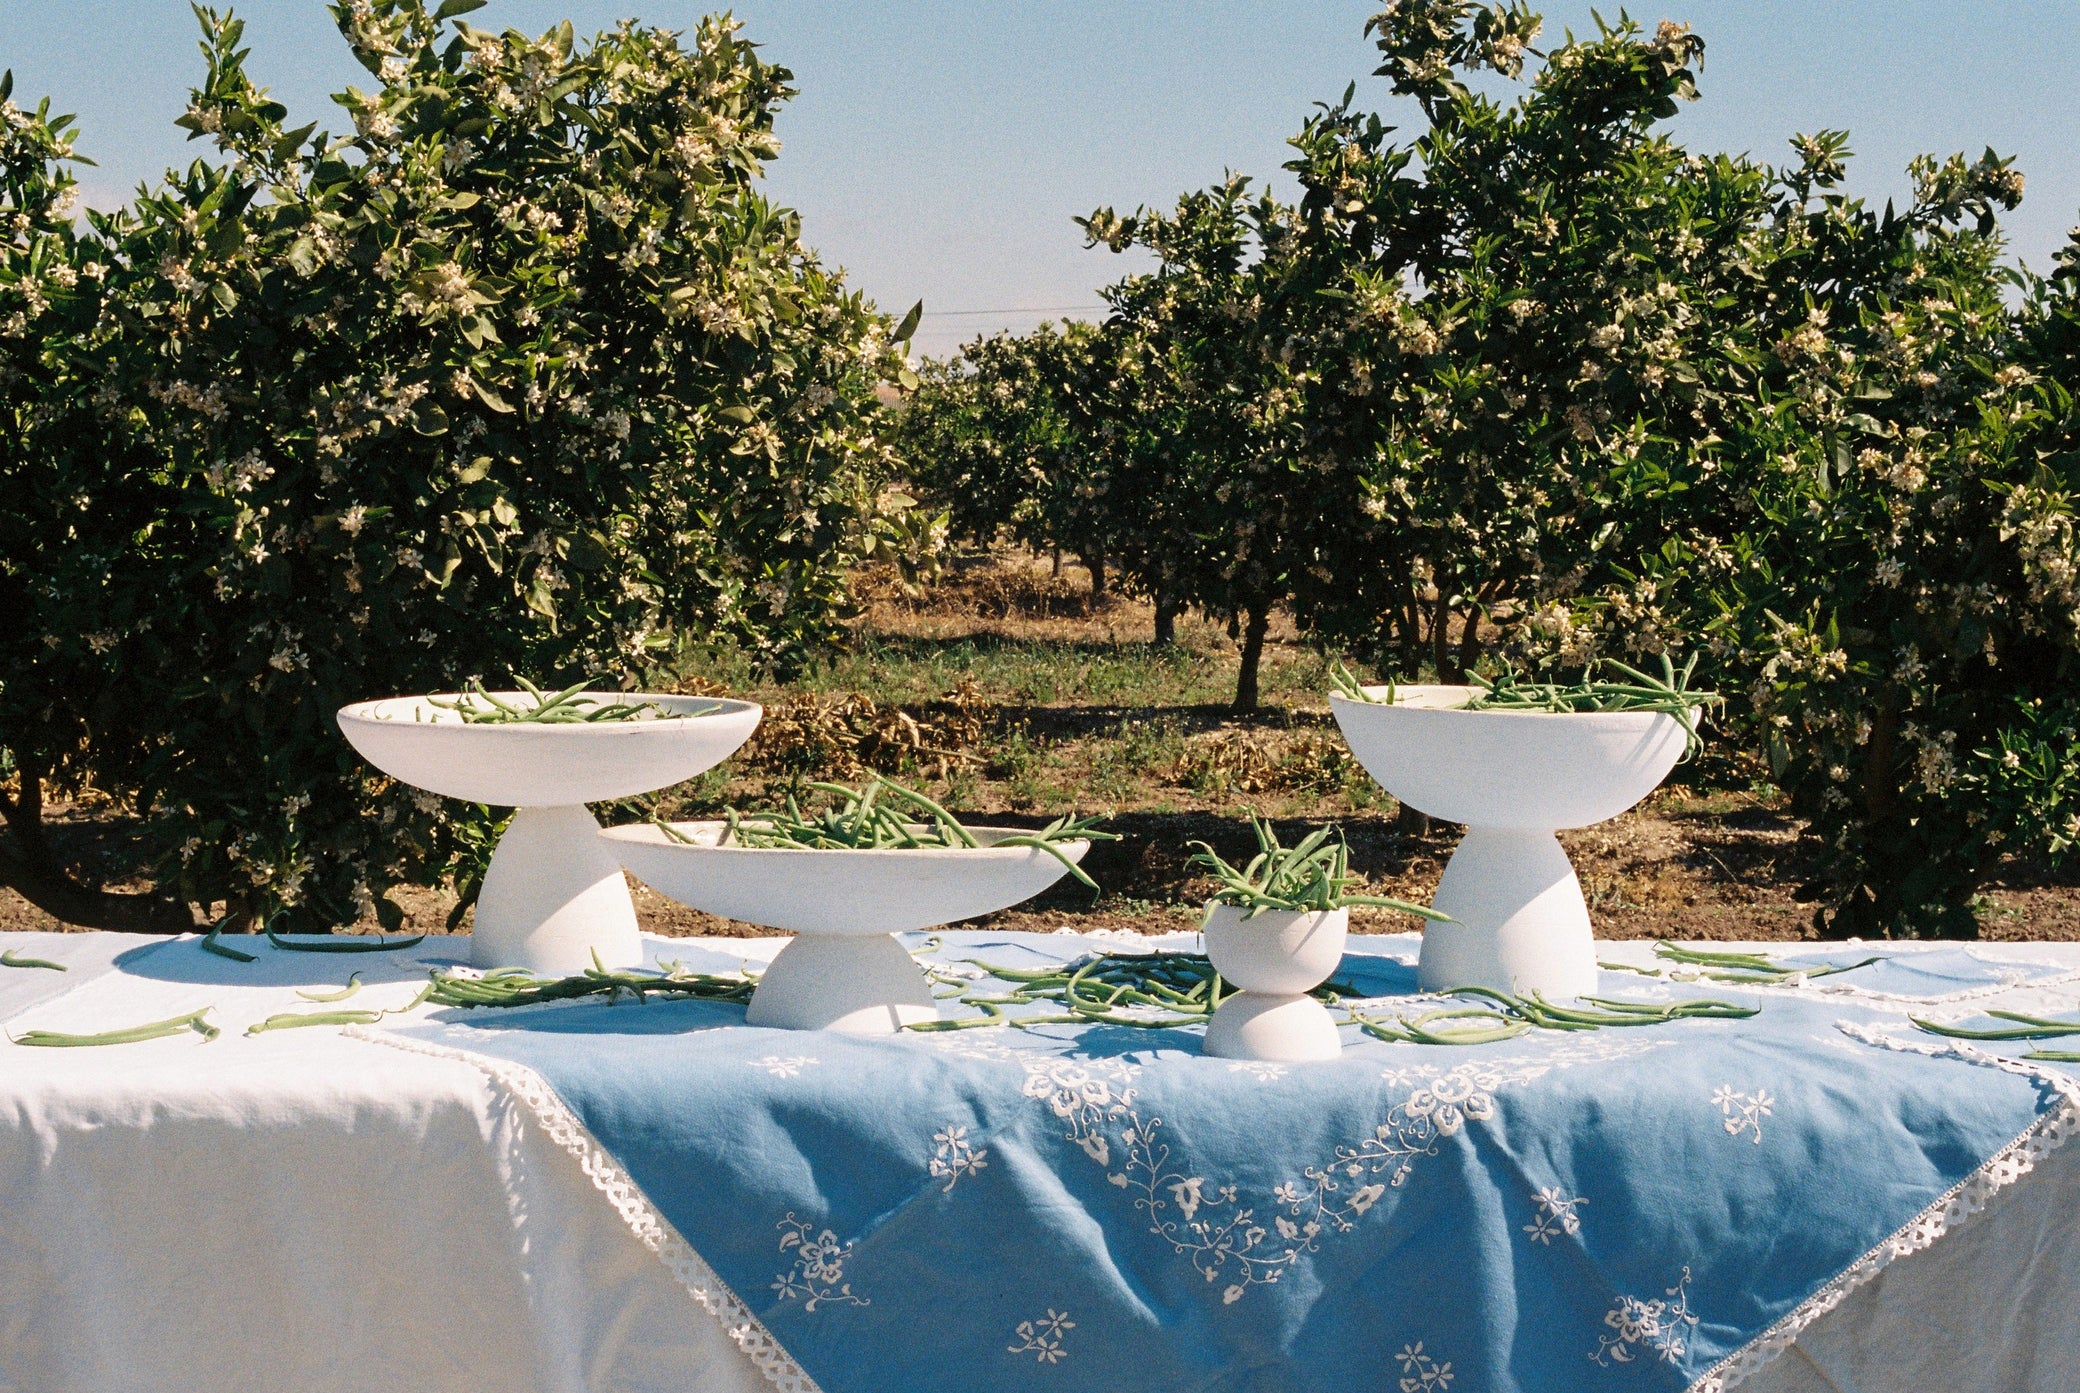 White bowls on a white and blue table located in the countryside